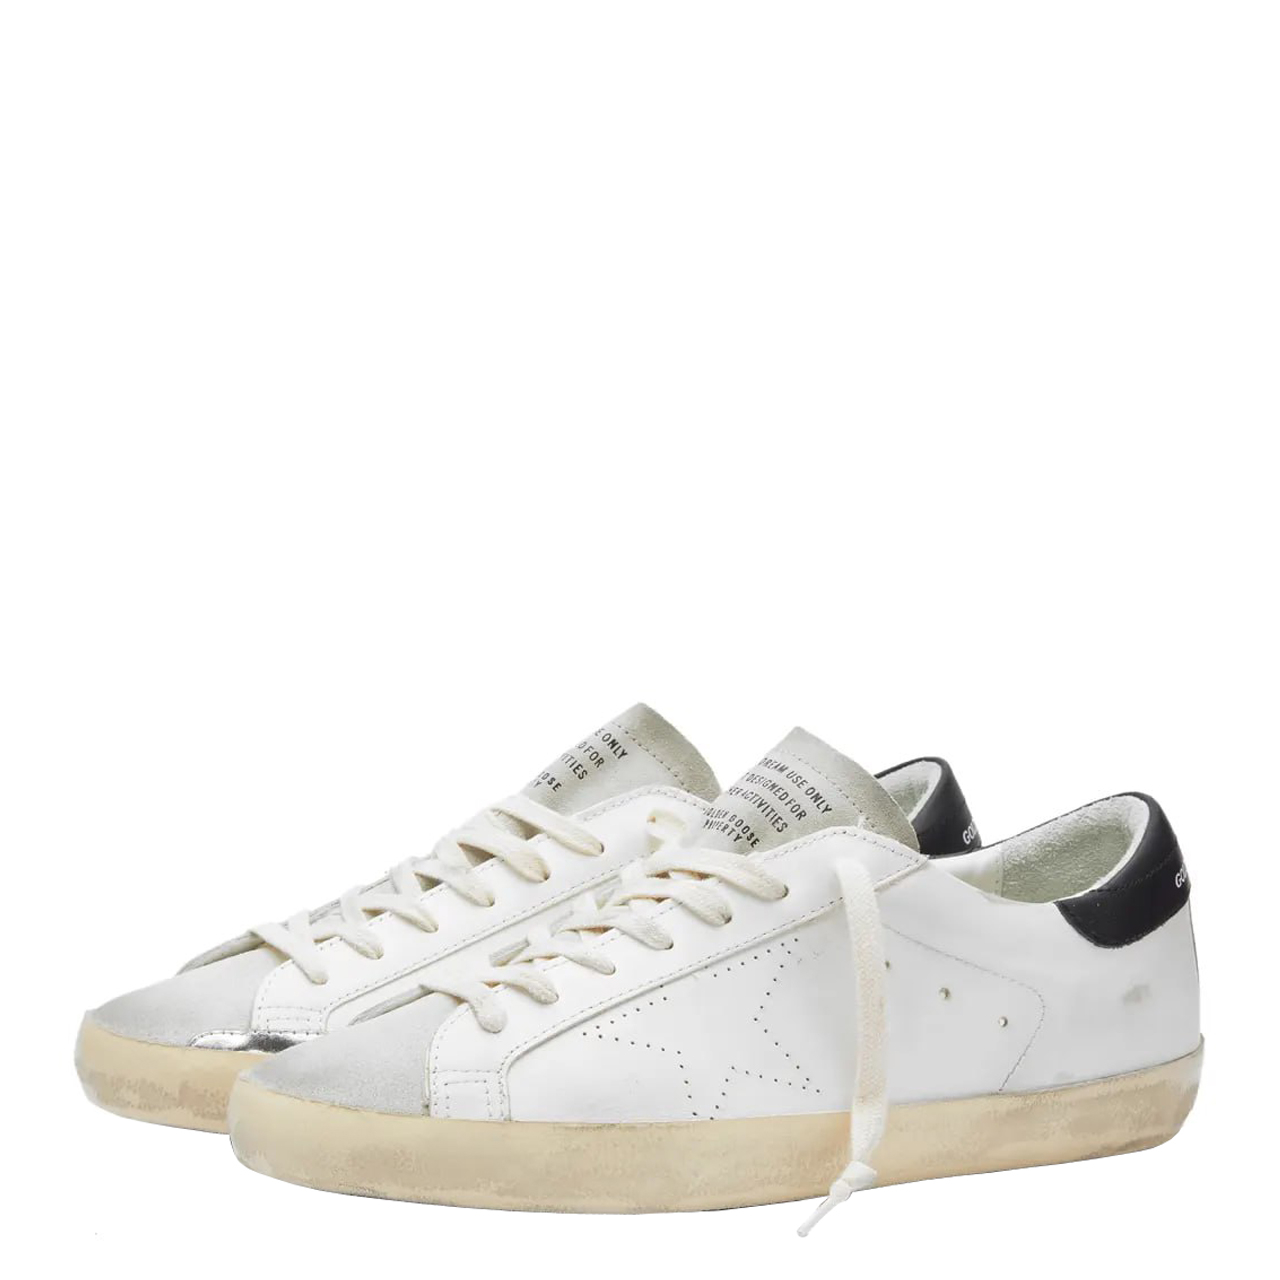 None Golden Goose Deluxe Brand GMF00105/F003347/10220, размер 41;43;45;46